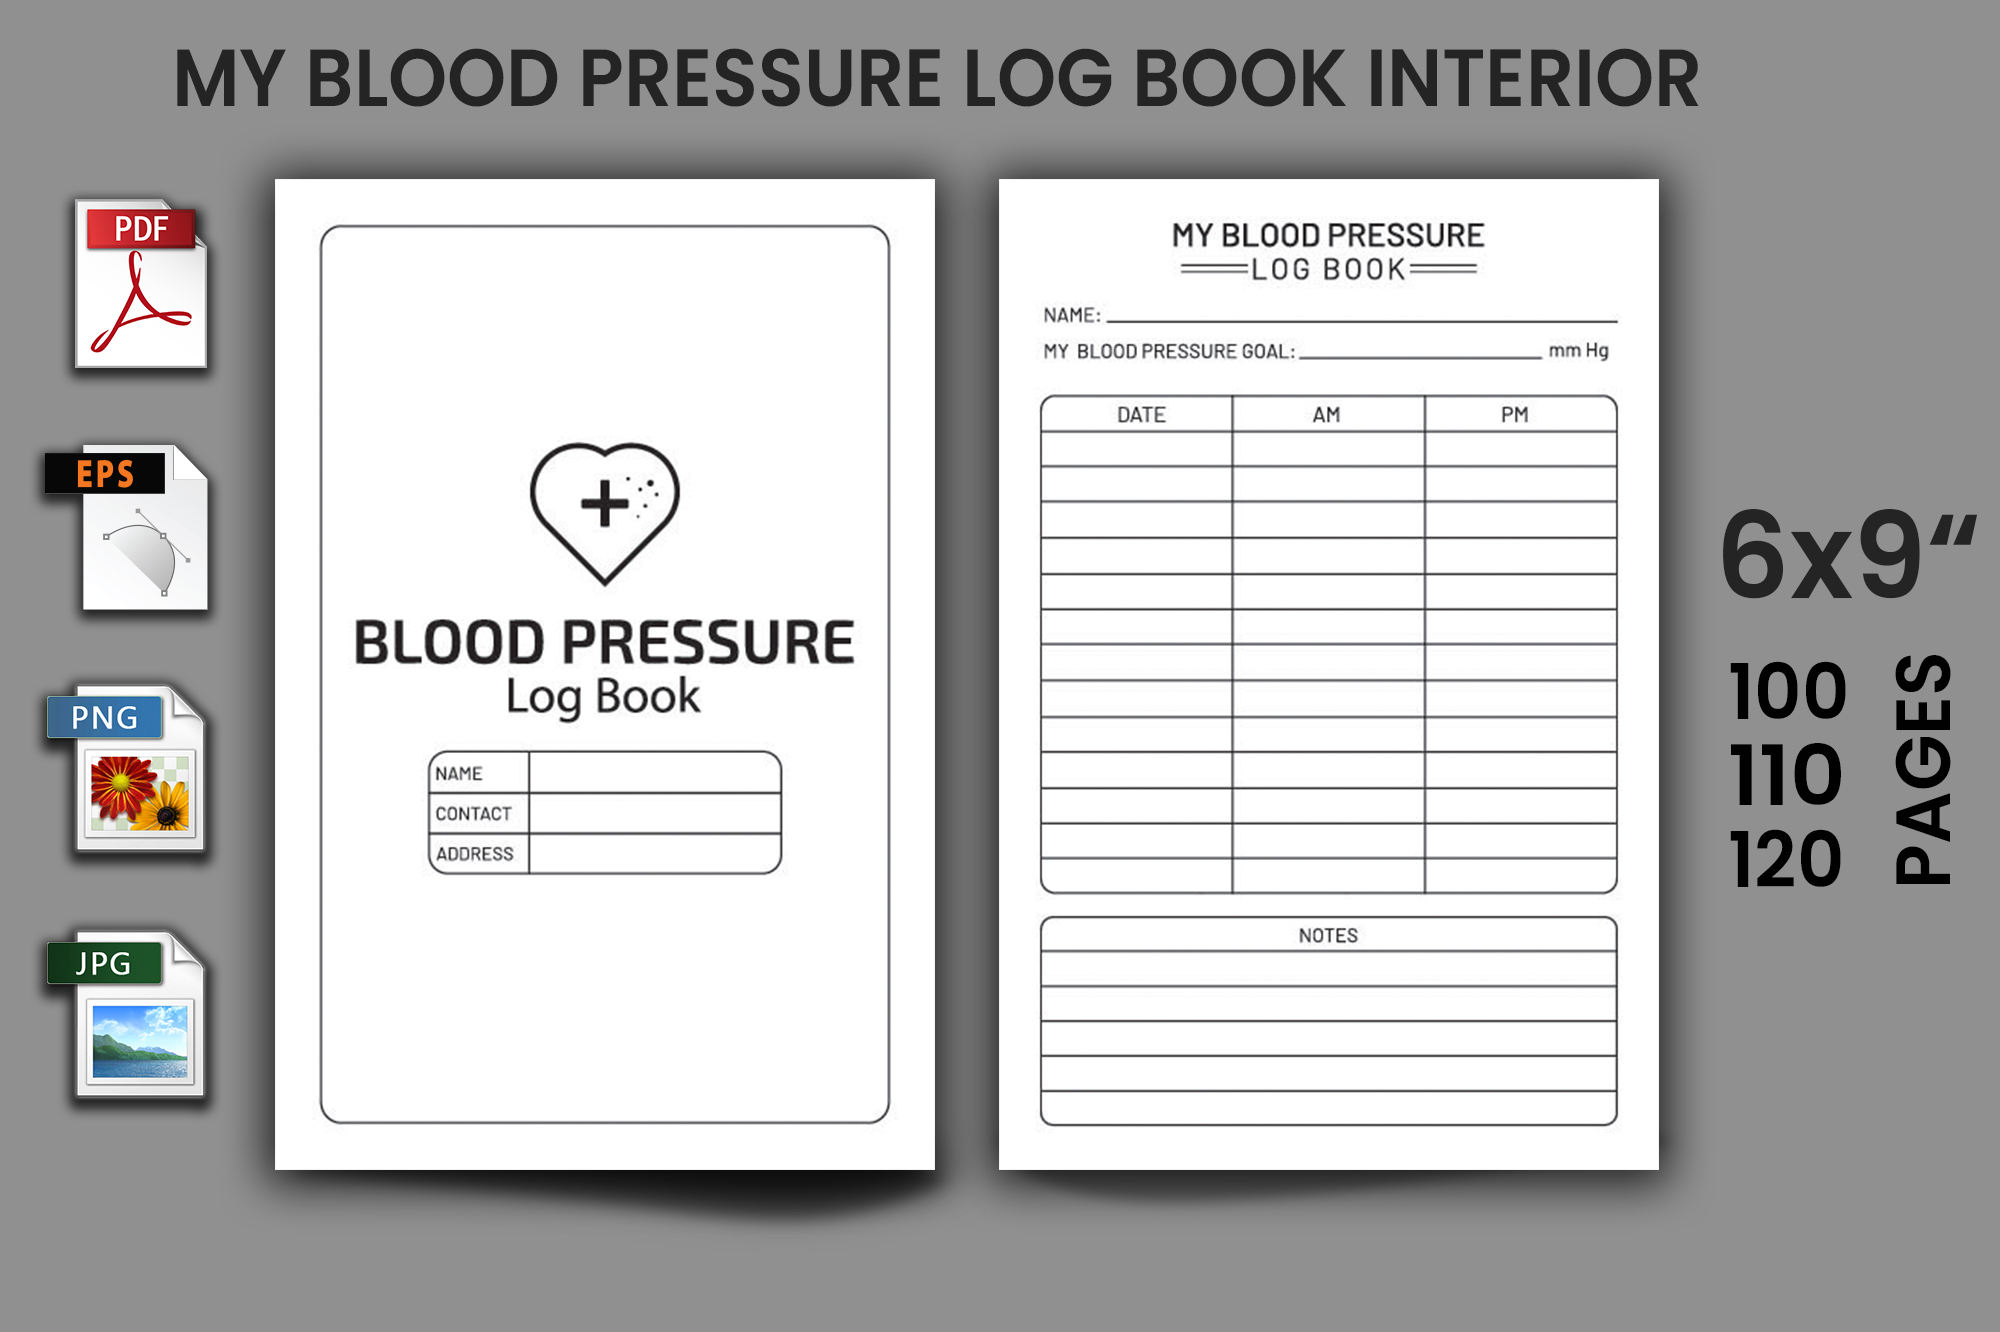 Blood pressure log book with a heart on it.